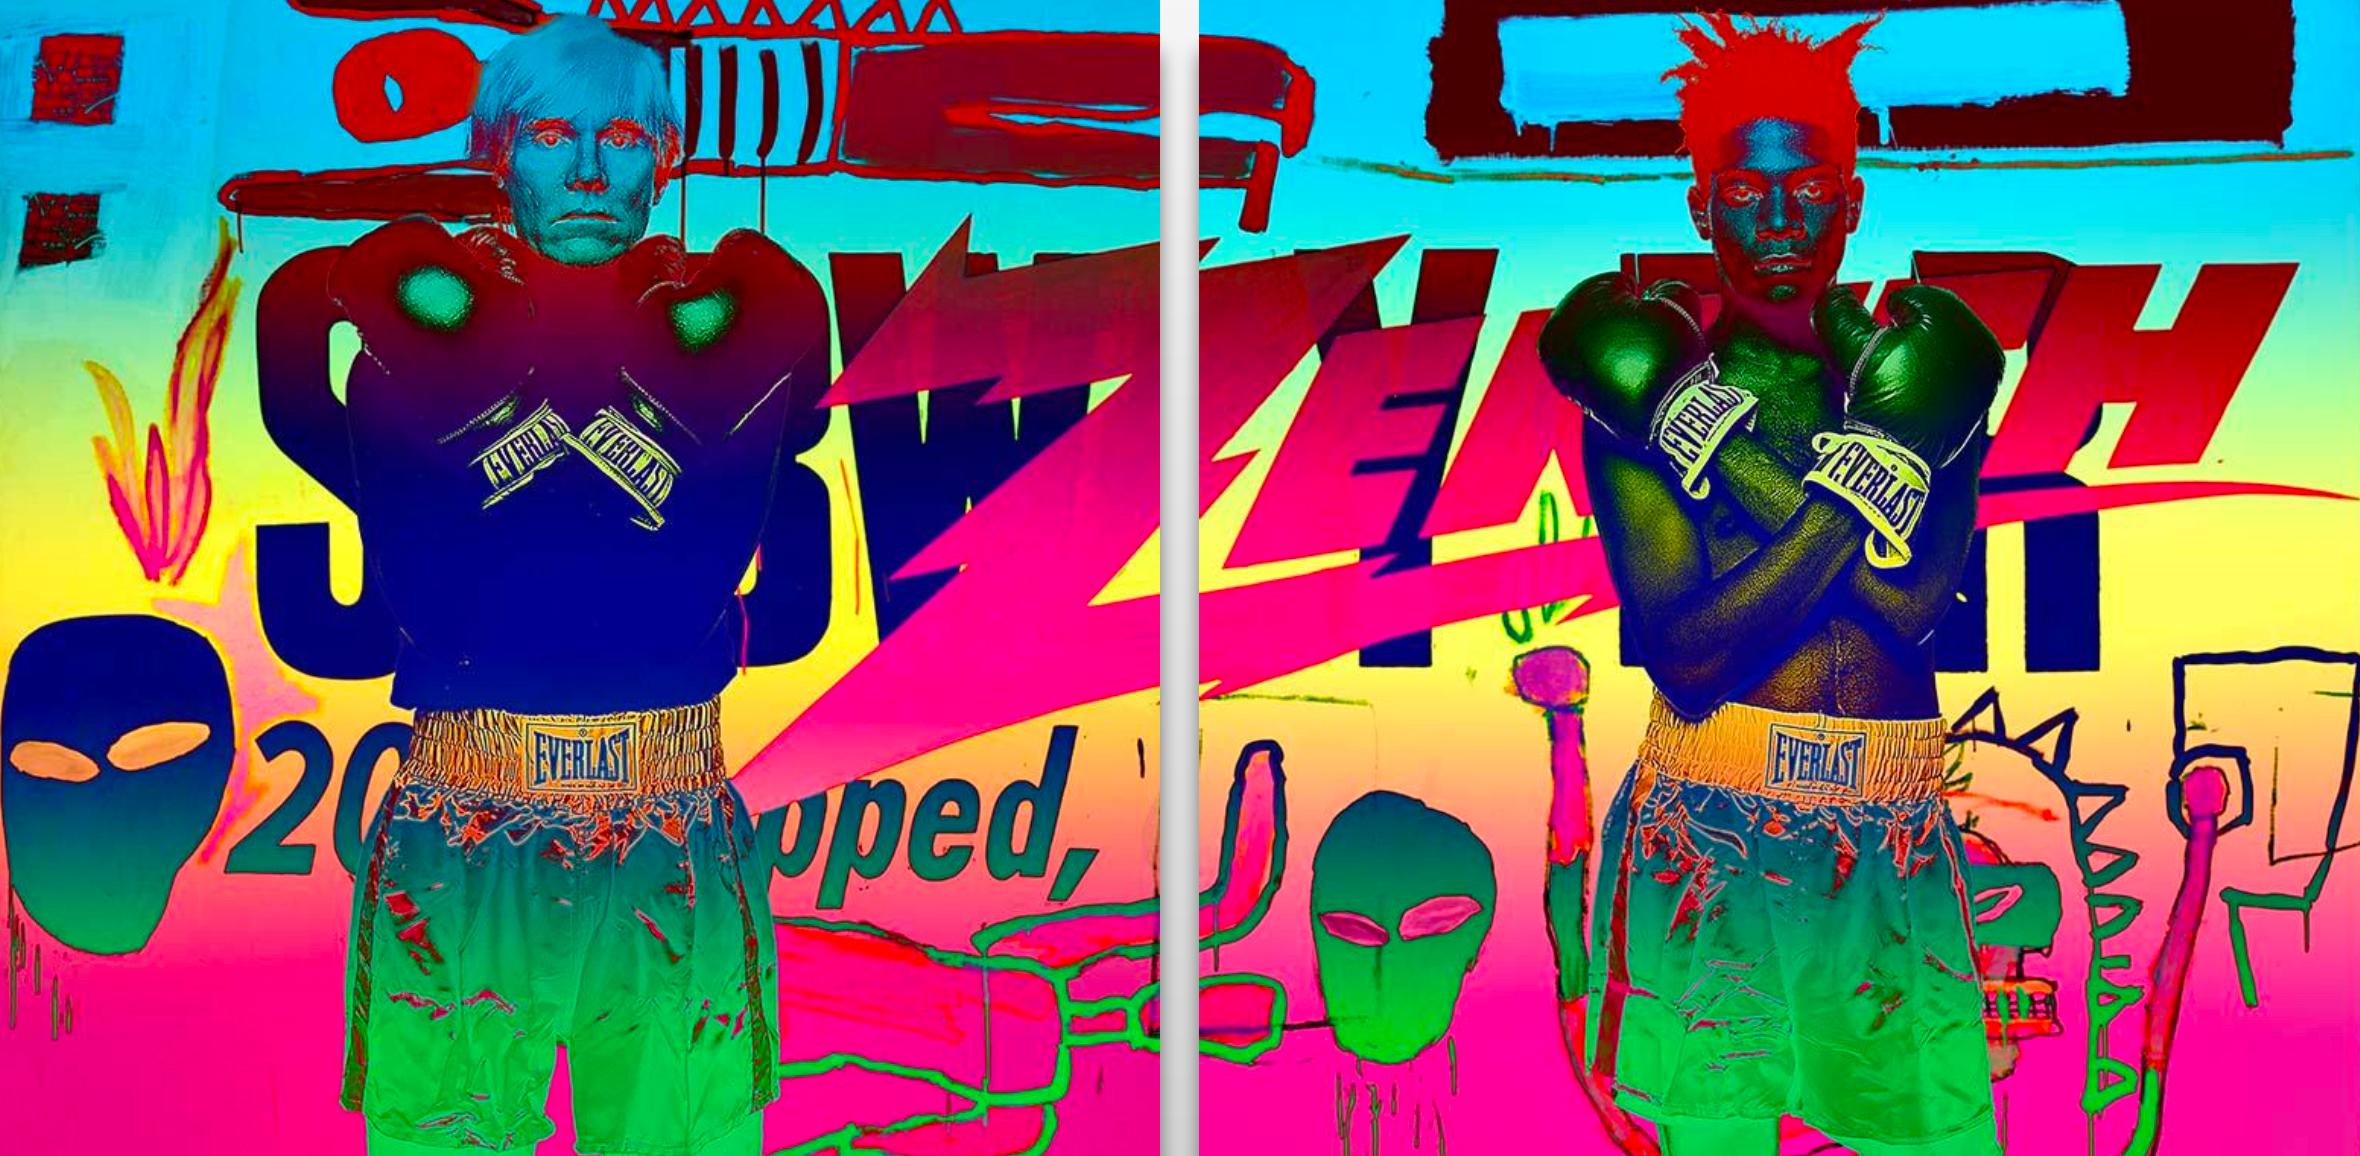 Diptyque Warhol & Basquiat - Contemporary Mixed Media Art by YouNs